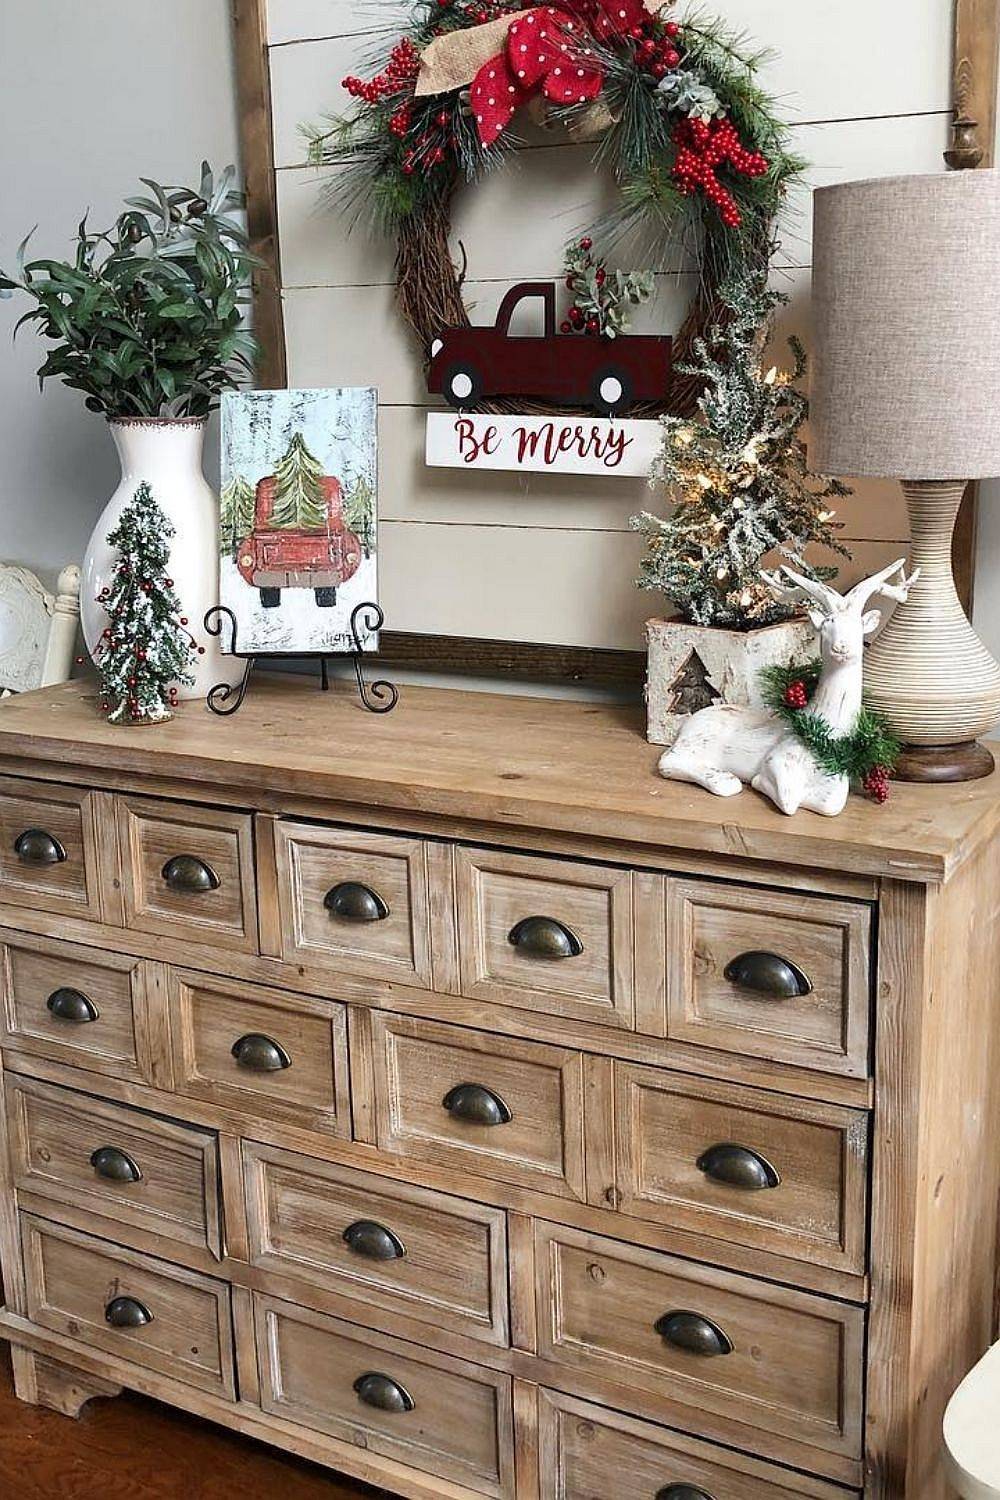 Wreath-above-the-console-table-along-with-small-illuminated-Christmas-trees-bring-festive-joy-to-this-entry-60572